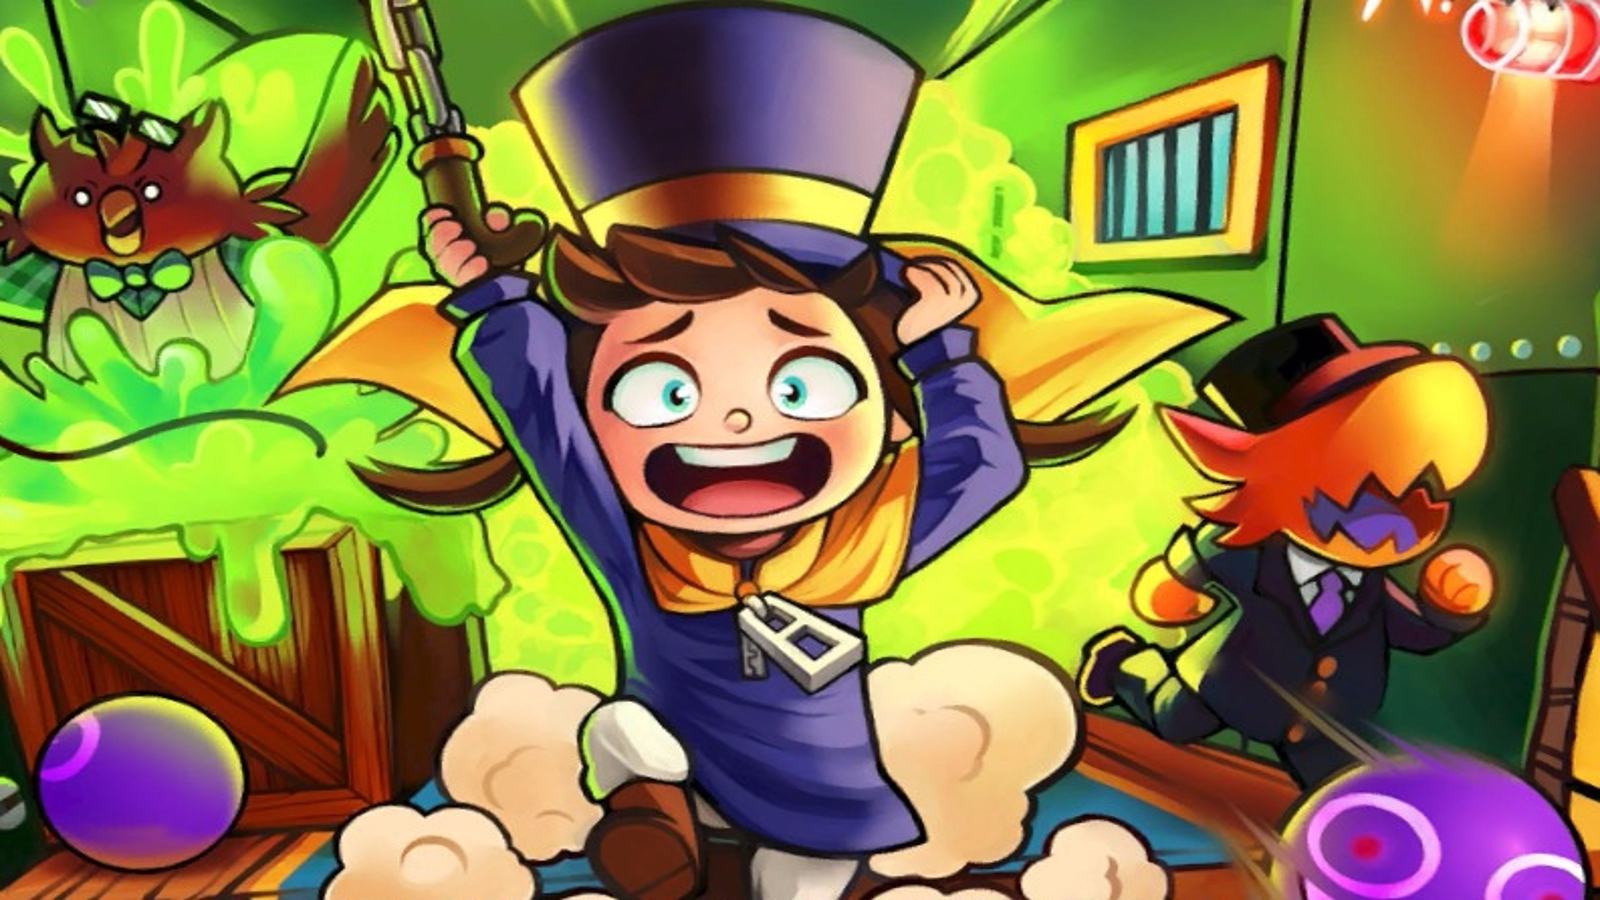 A Hat in Time! 